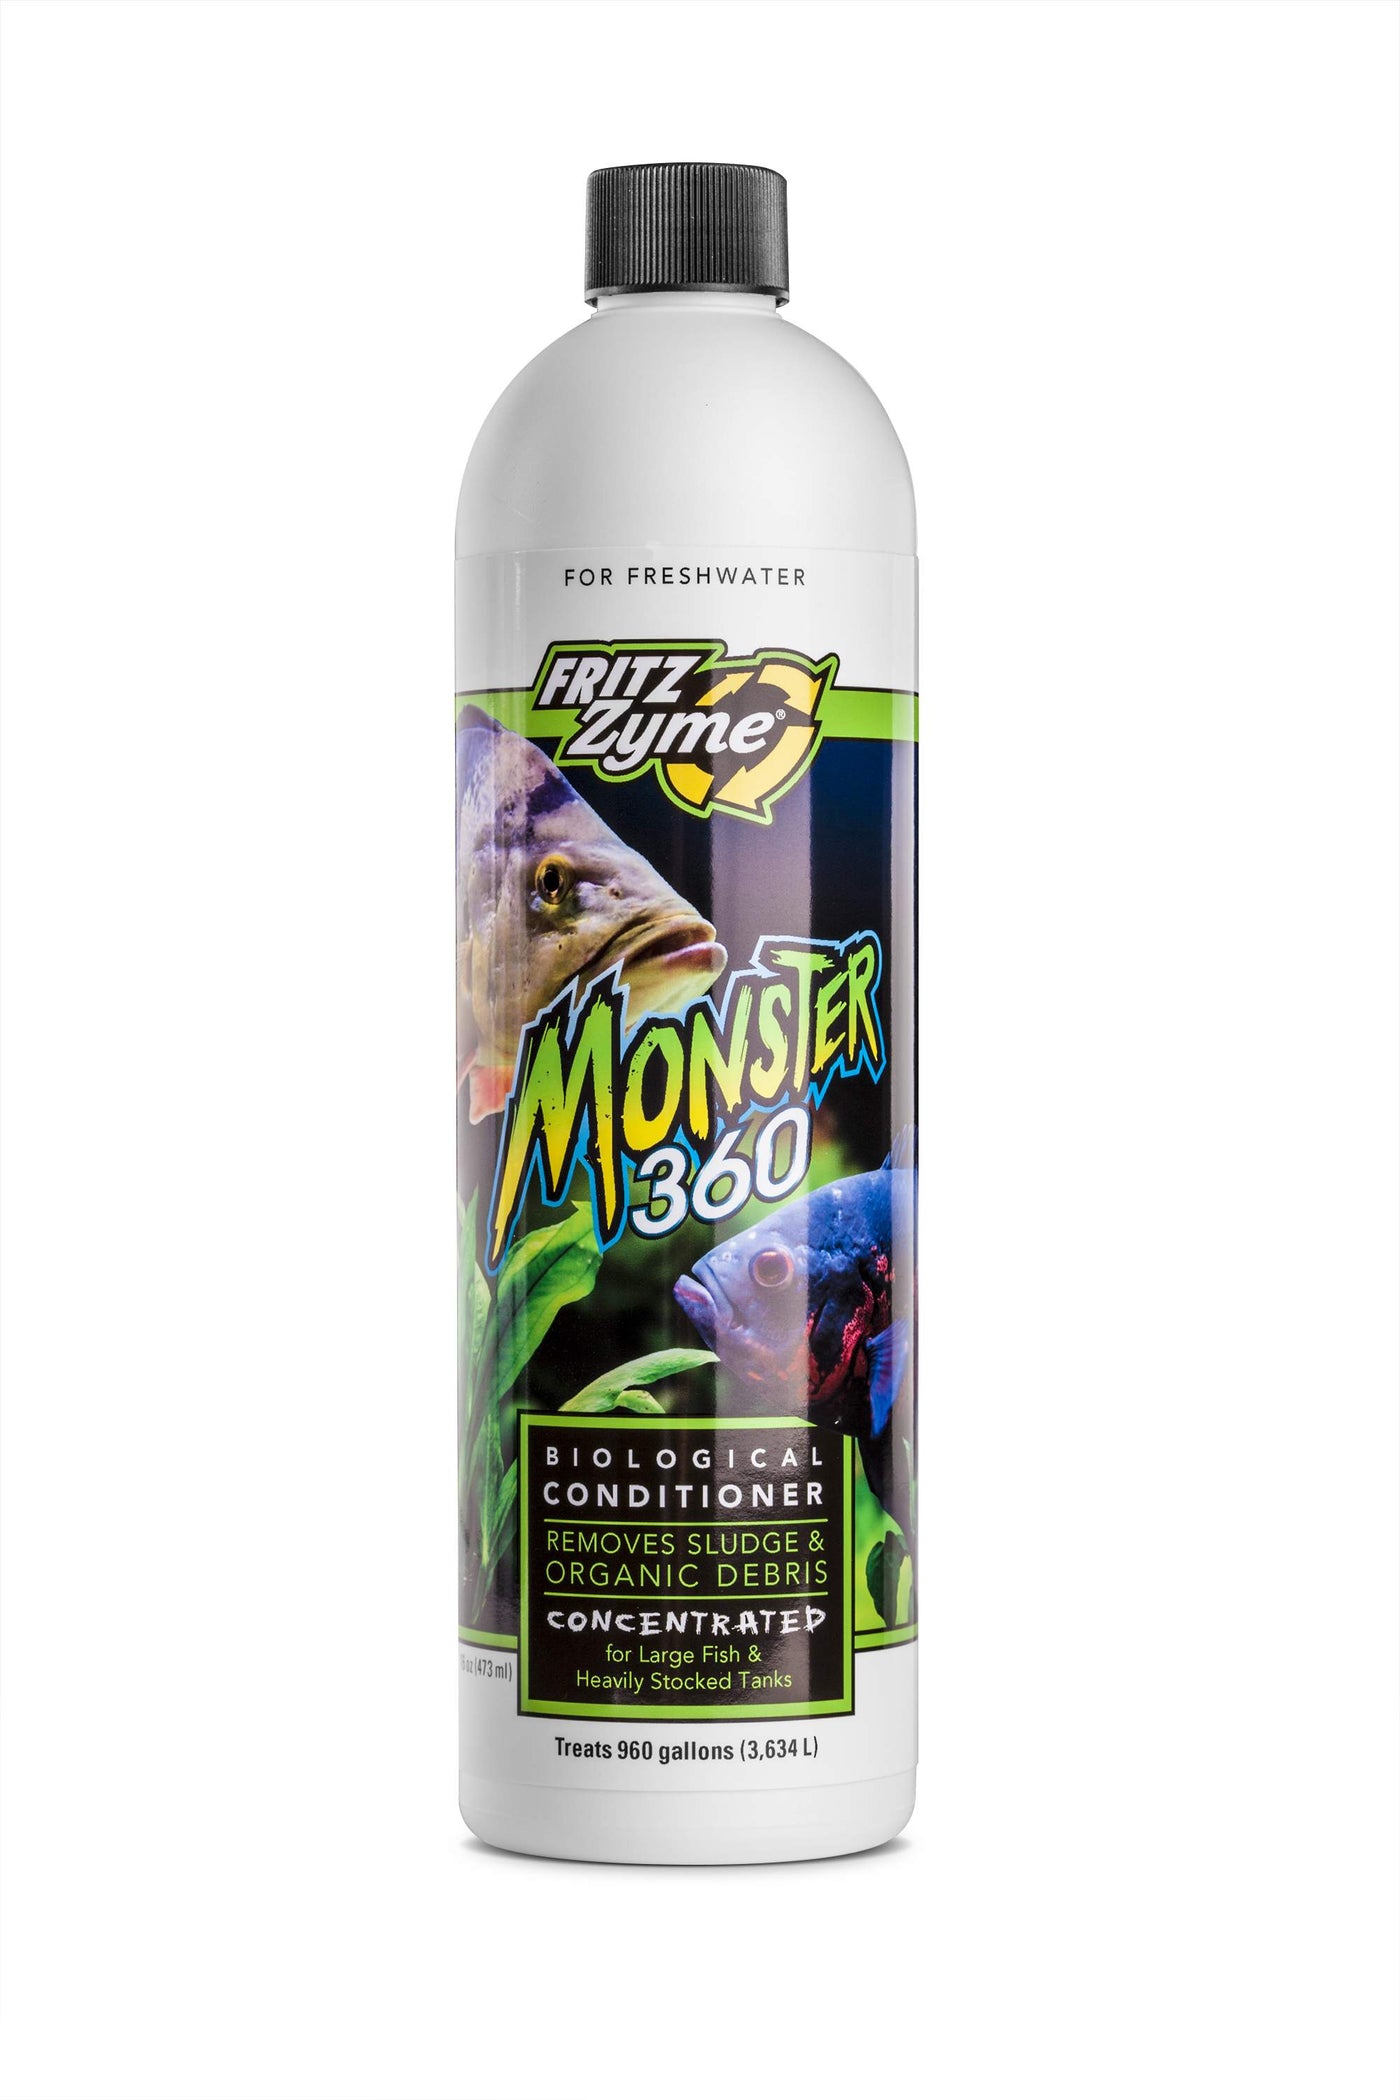 FritzZyme Monster 360 Freshwater Concentrated Biodigester